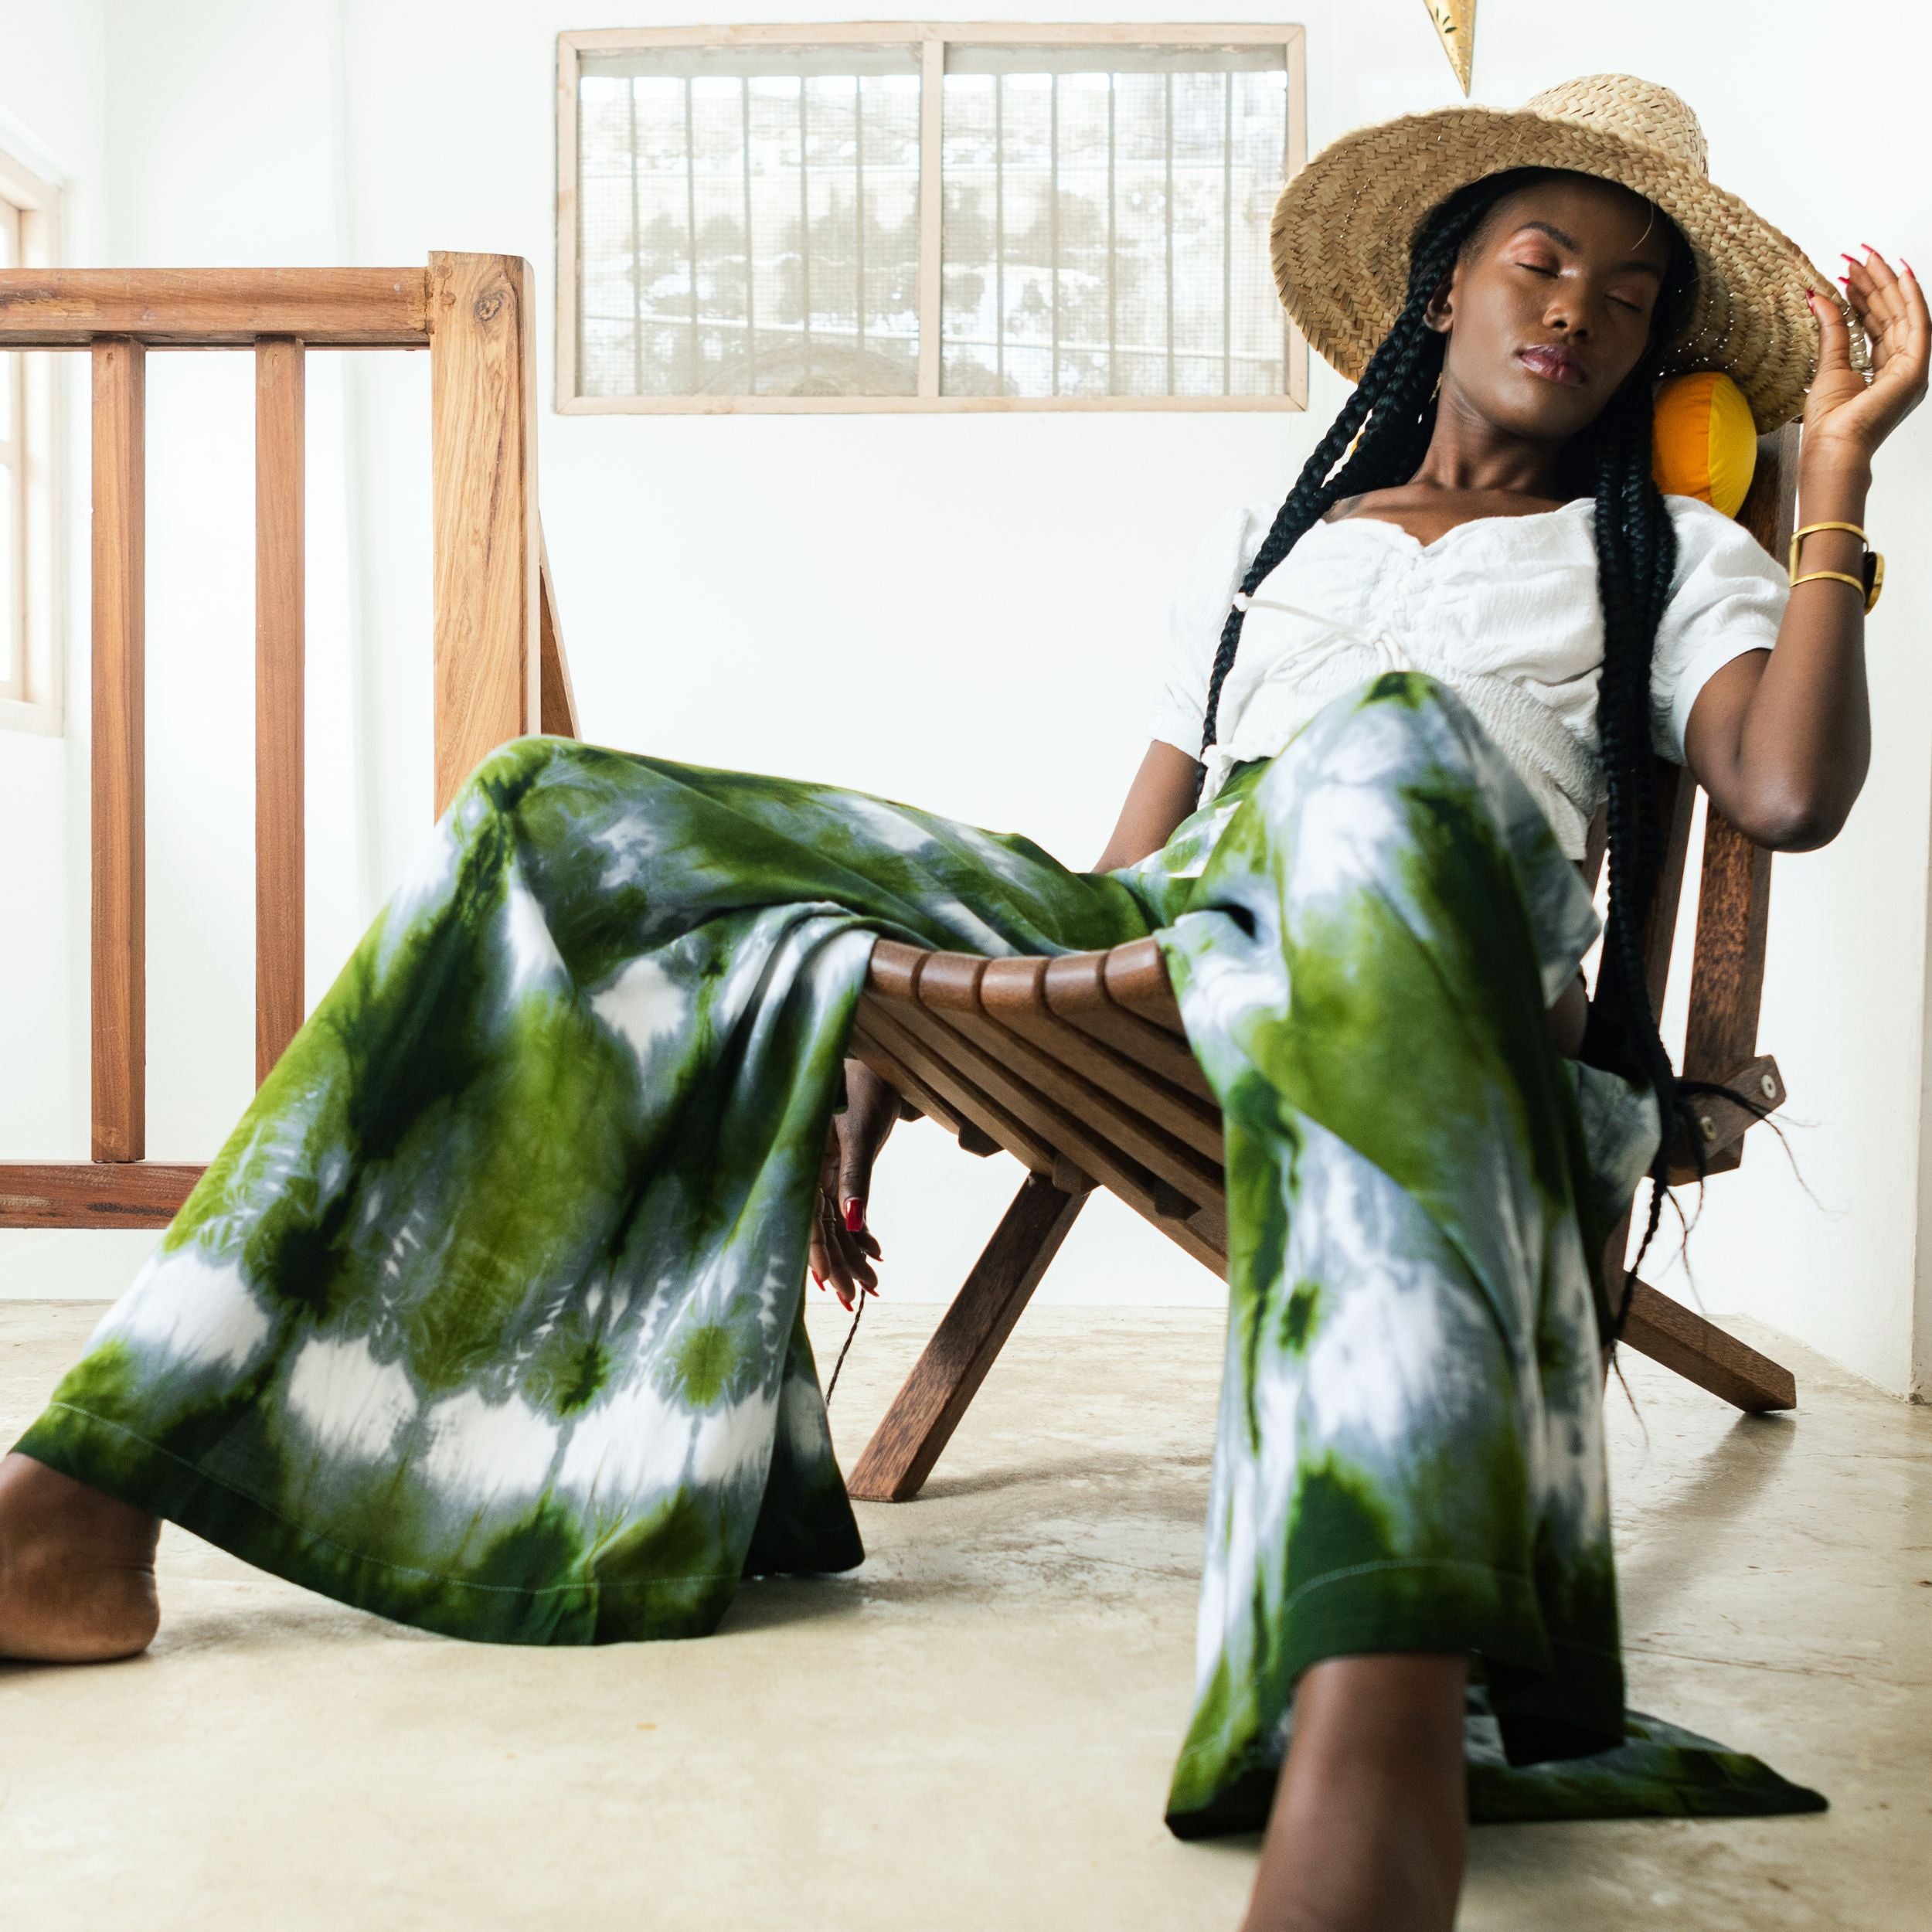 Editorial photo: Model wears Wrap Trousers in Tie Dye Intense Green with a white top and a hat. She is sitting in a wooden chair.